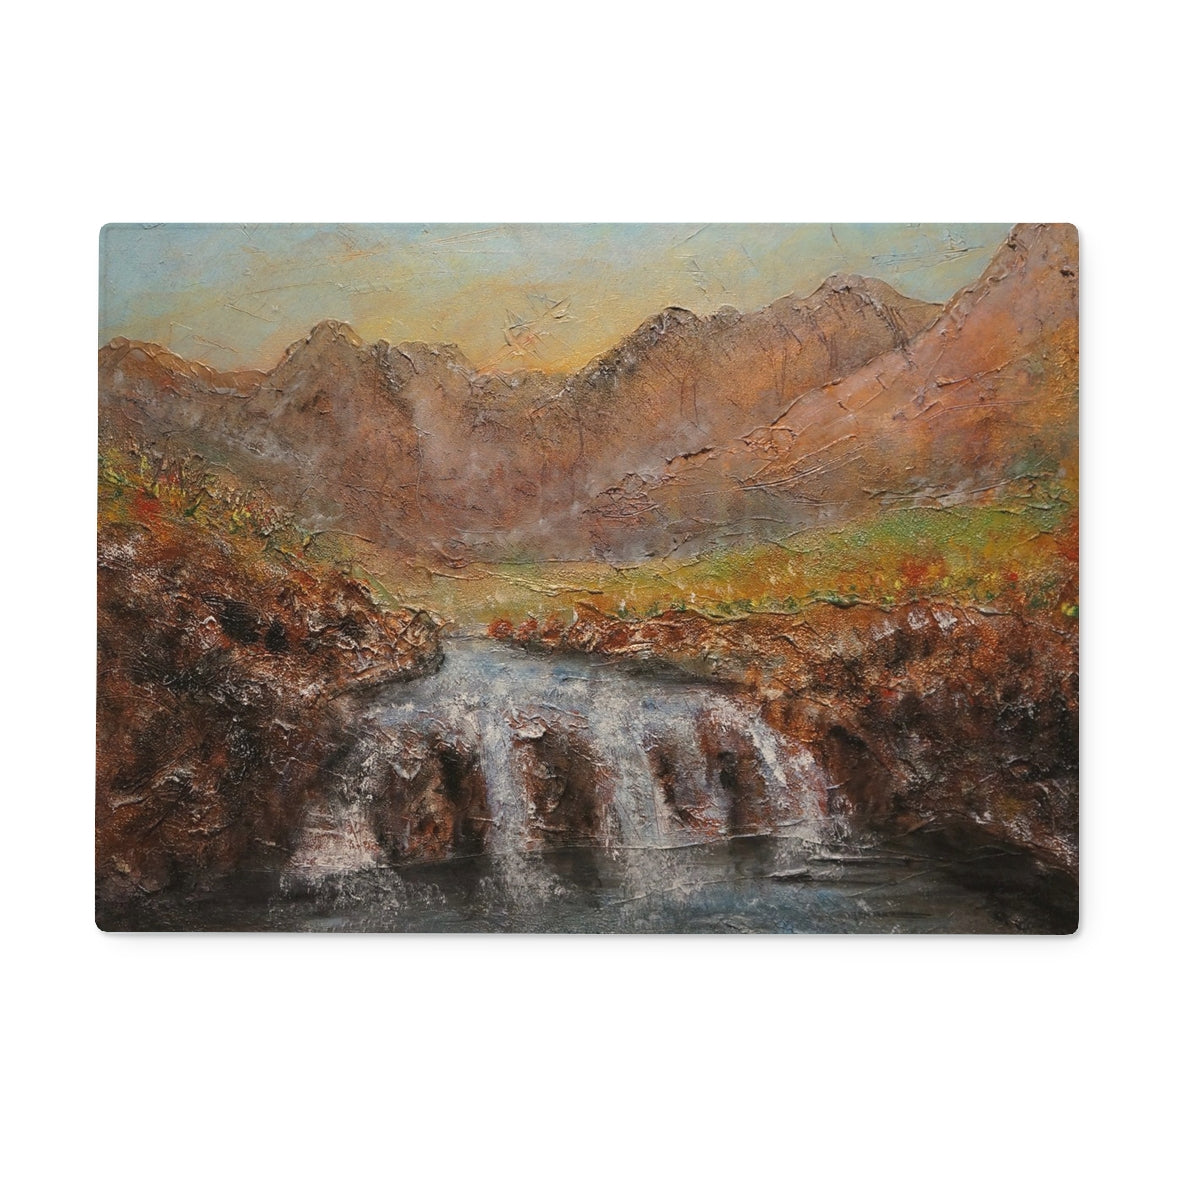 Fairy Pools Dawn Skye Art Gifts Glass Chopping Board-Glass Chopping Boards-Skye Art Gallery-15"x11" Rectangular-Paintings, Prints, Homeware, Art Gifts From Scotland By Scottish Artist Kevin Hunter